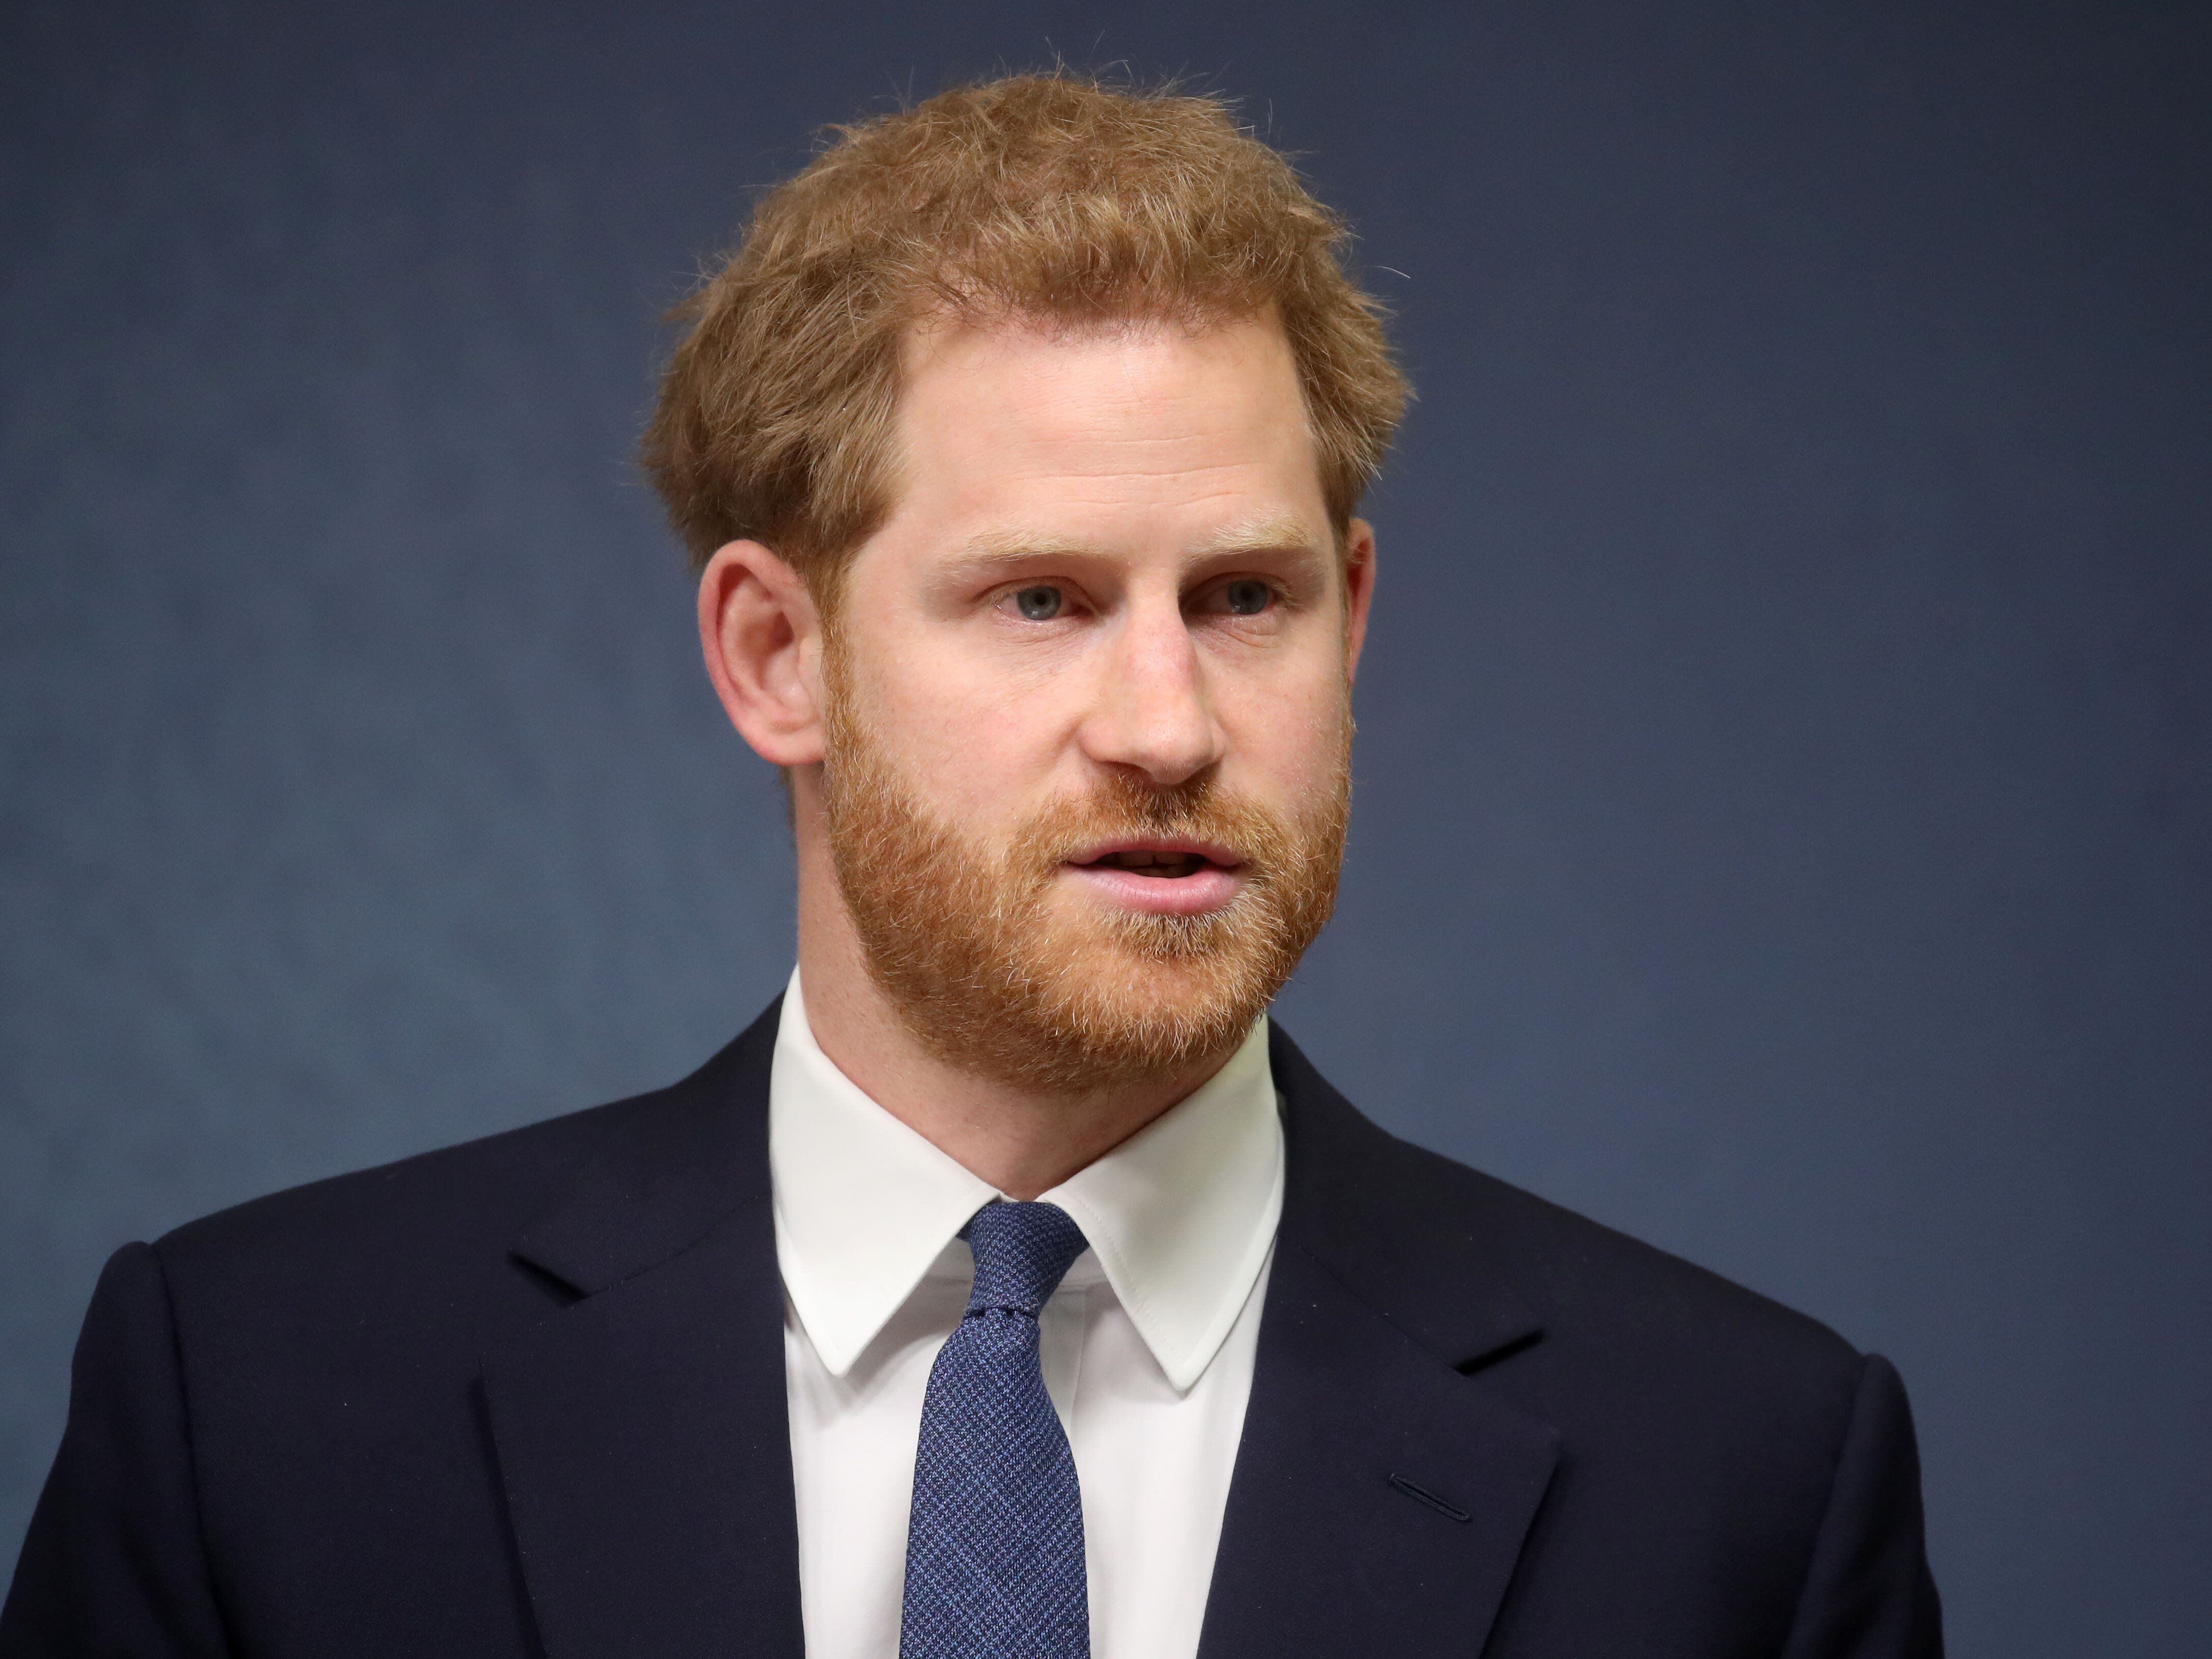 Harry says quitting jobs to put mental health first should be celebrated